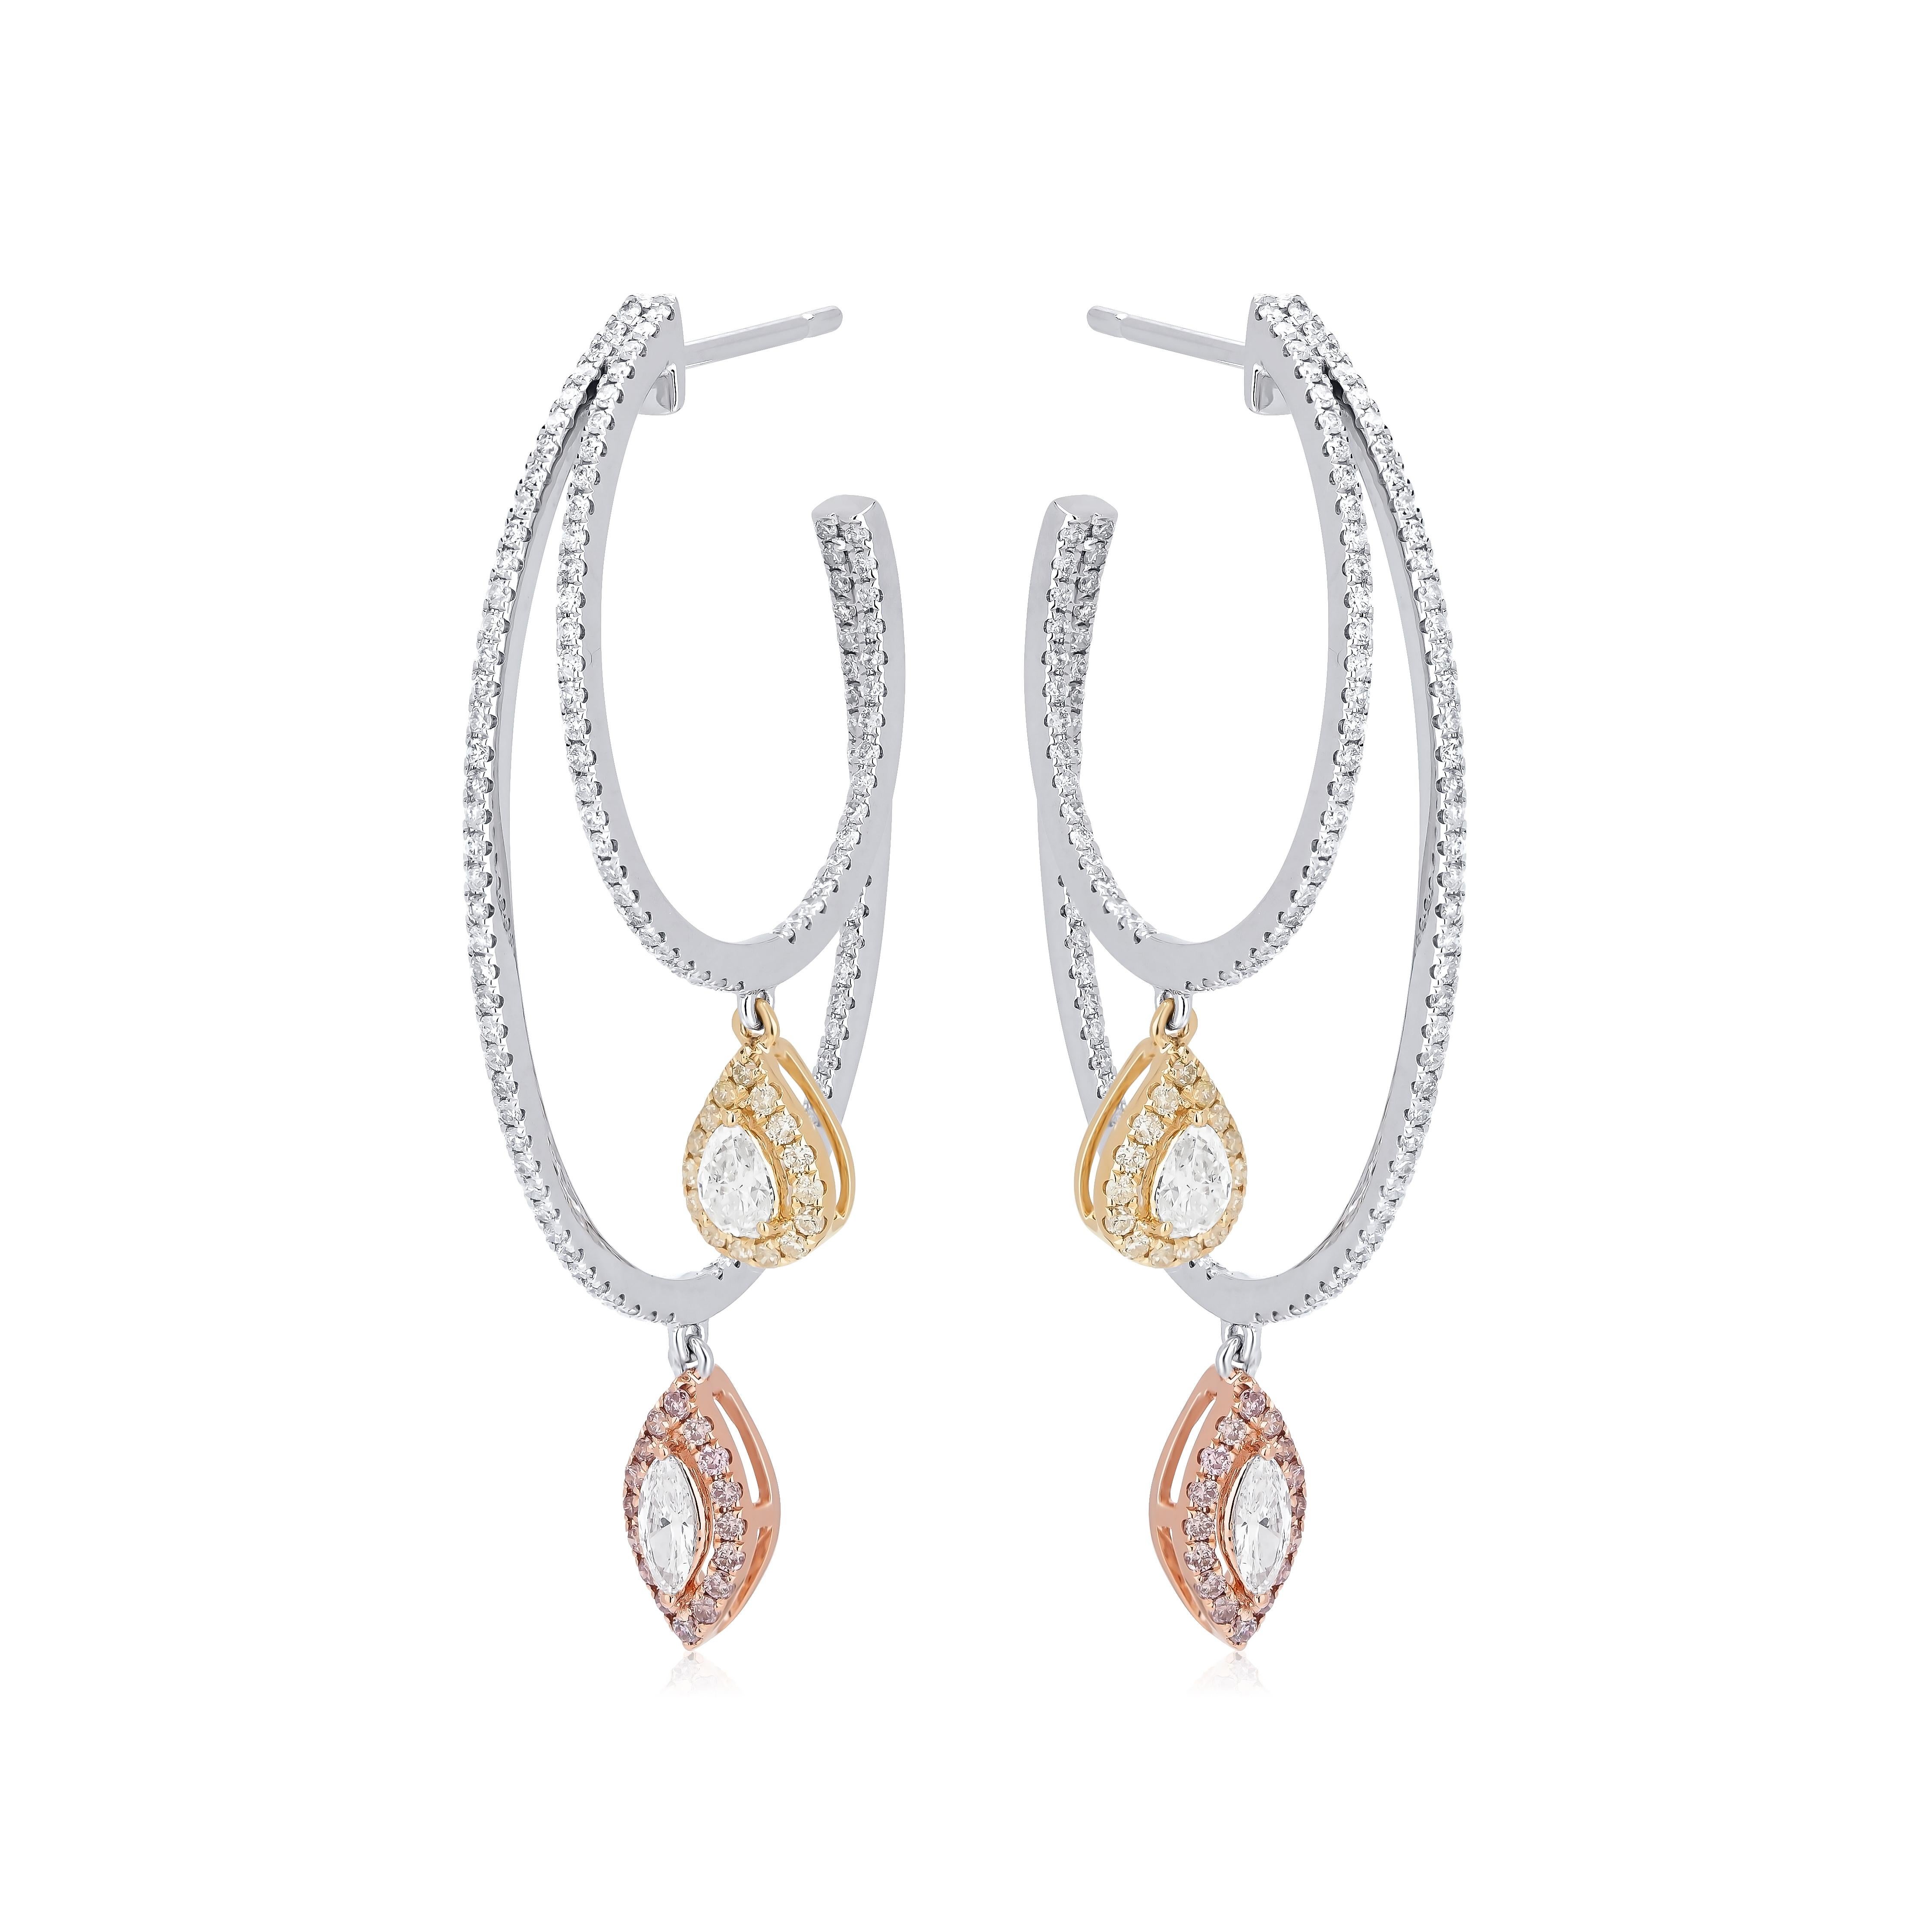 Introducing our newest half hoop drop earring, made by Luxle with 18K white, rose, and yellow gold. This beautiful hoop earring features diamonds in round, pear and marquise shapes. The diamonds are SI1, I1 in clarity and GH, YL and pink in color,